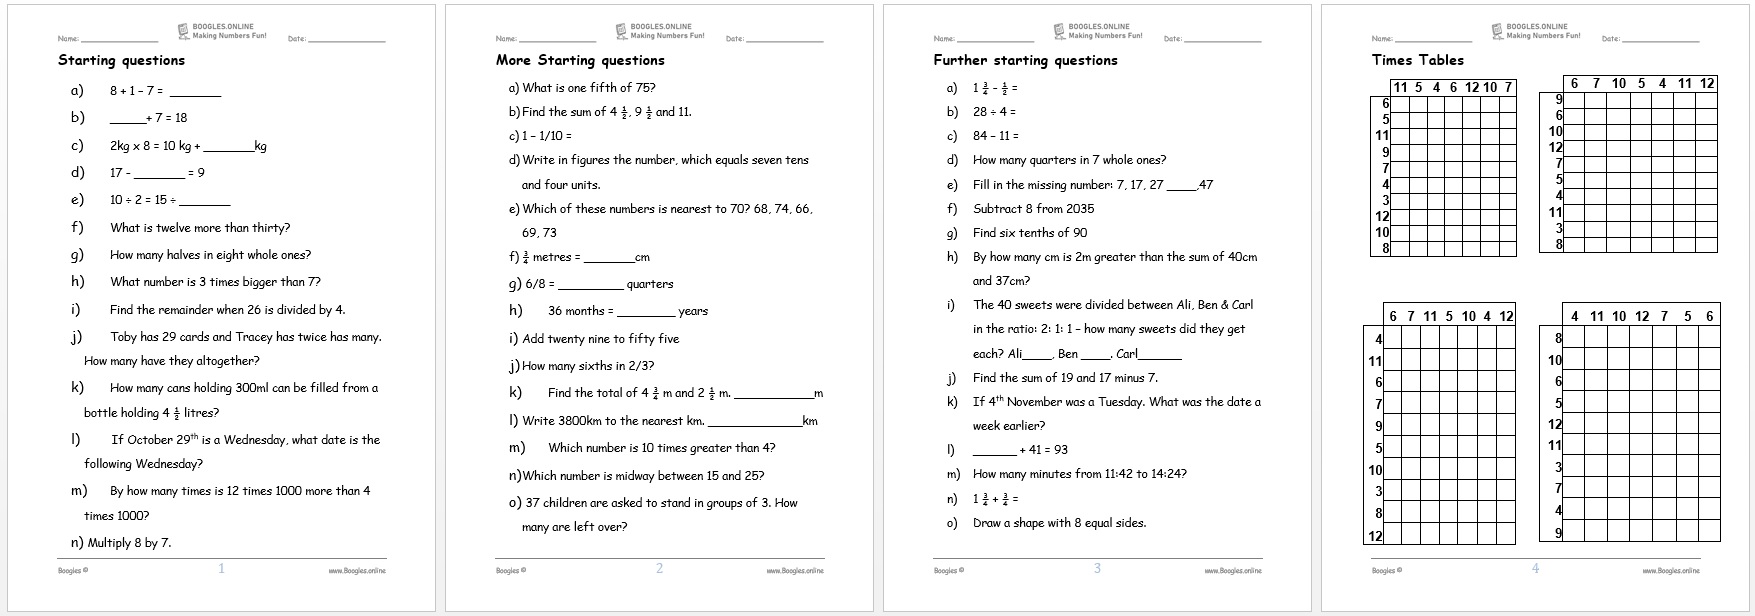 Workbook 3 Pages 1-4